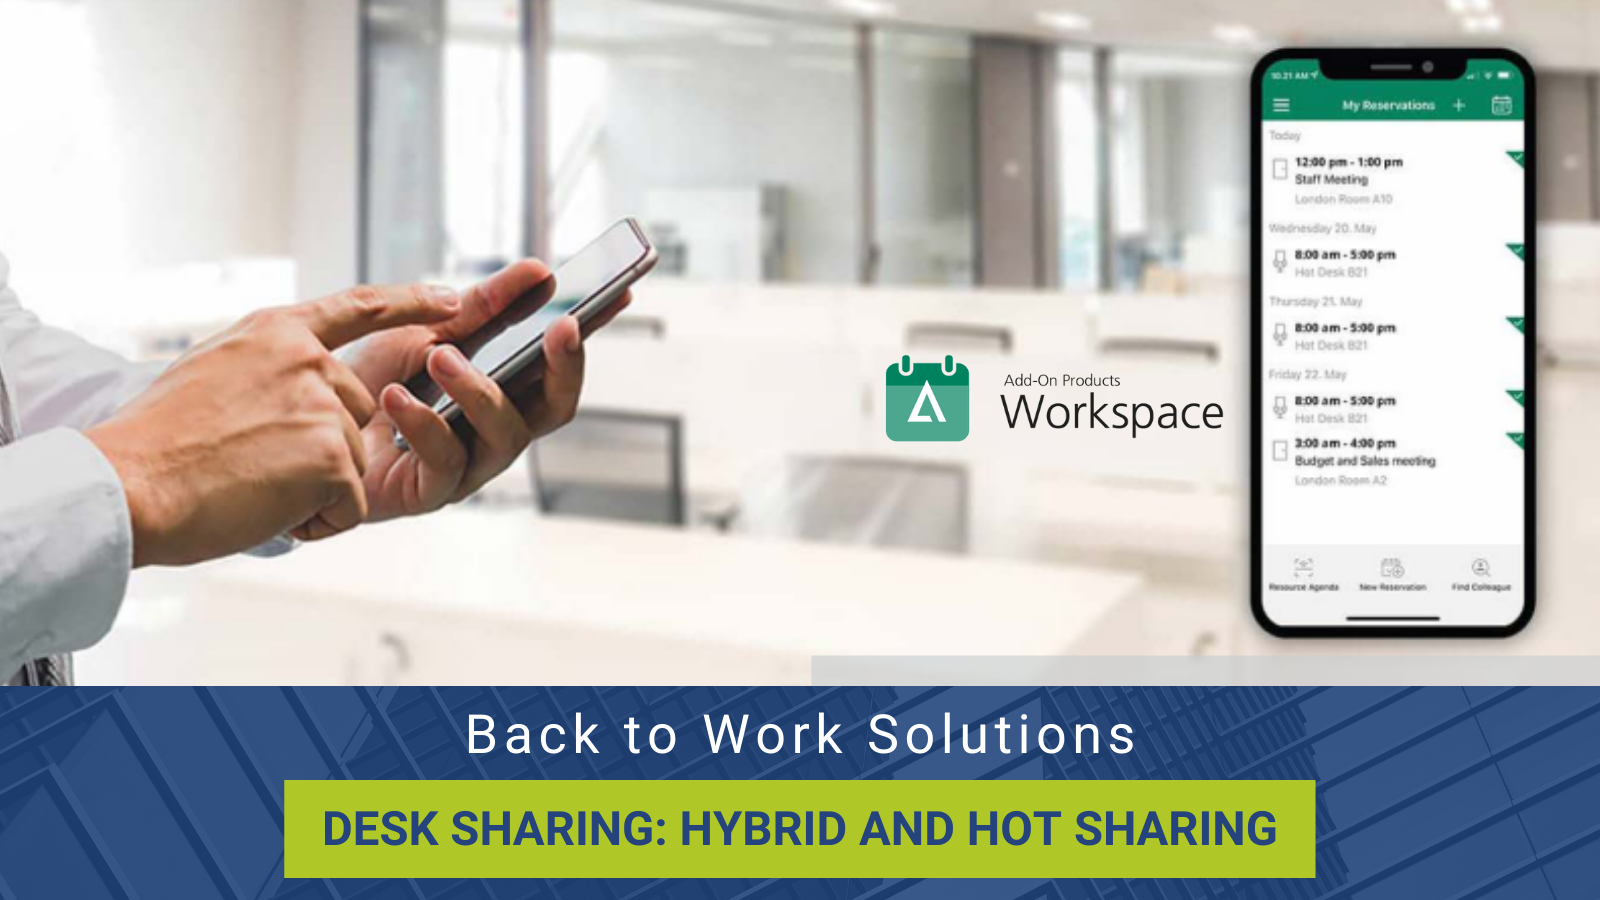 Twitter Back to Work Solutions Desk sharing hybrid and hot sharing